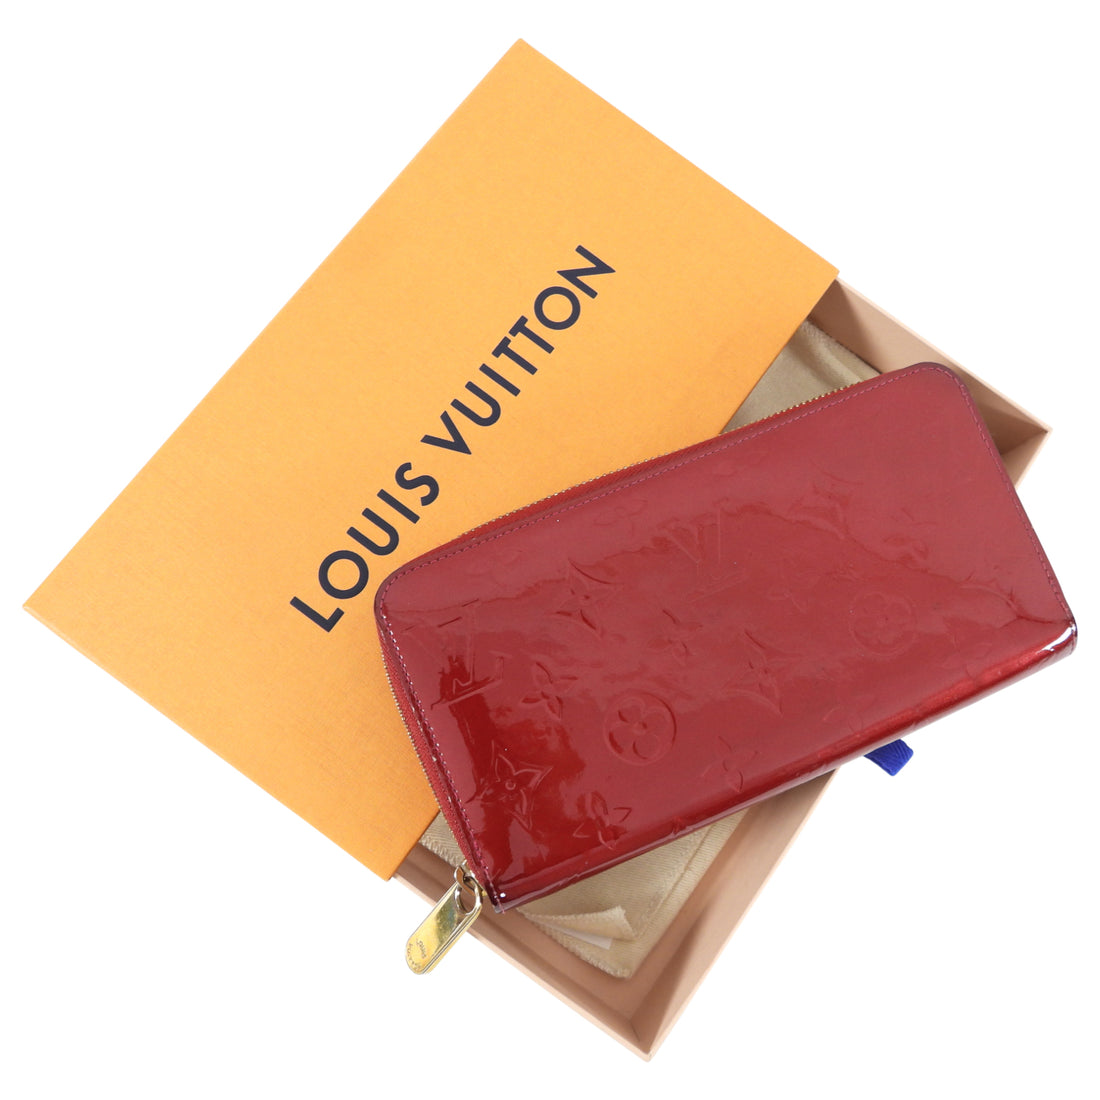 Patent leather wallet Louis Vuitton Red in Patent leather - 24667899